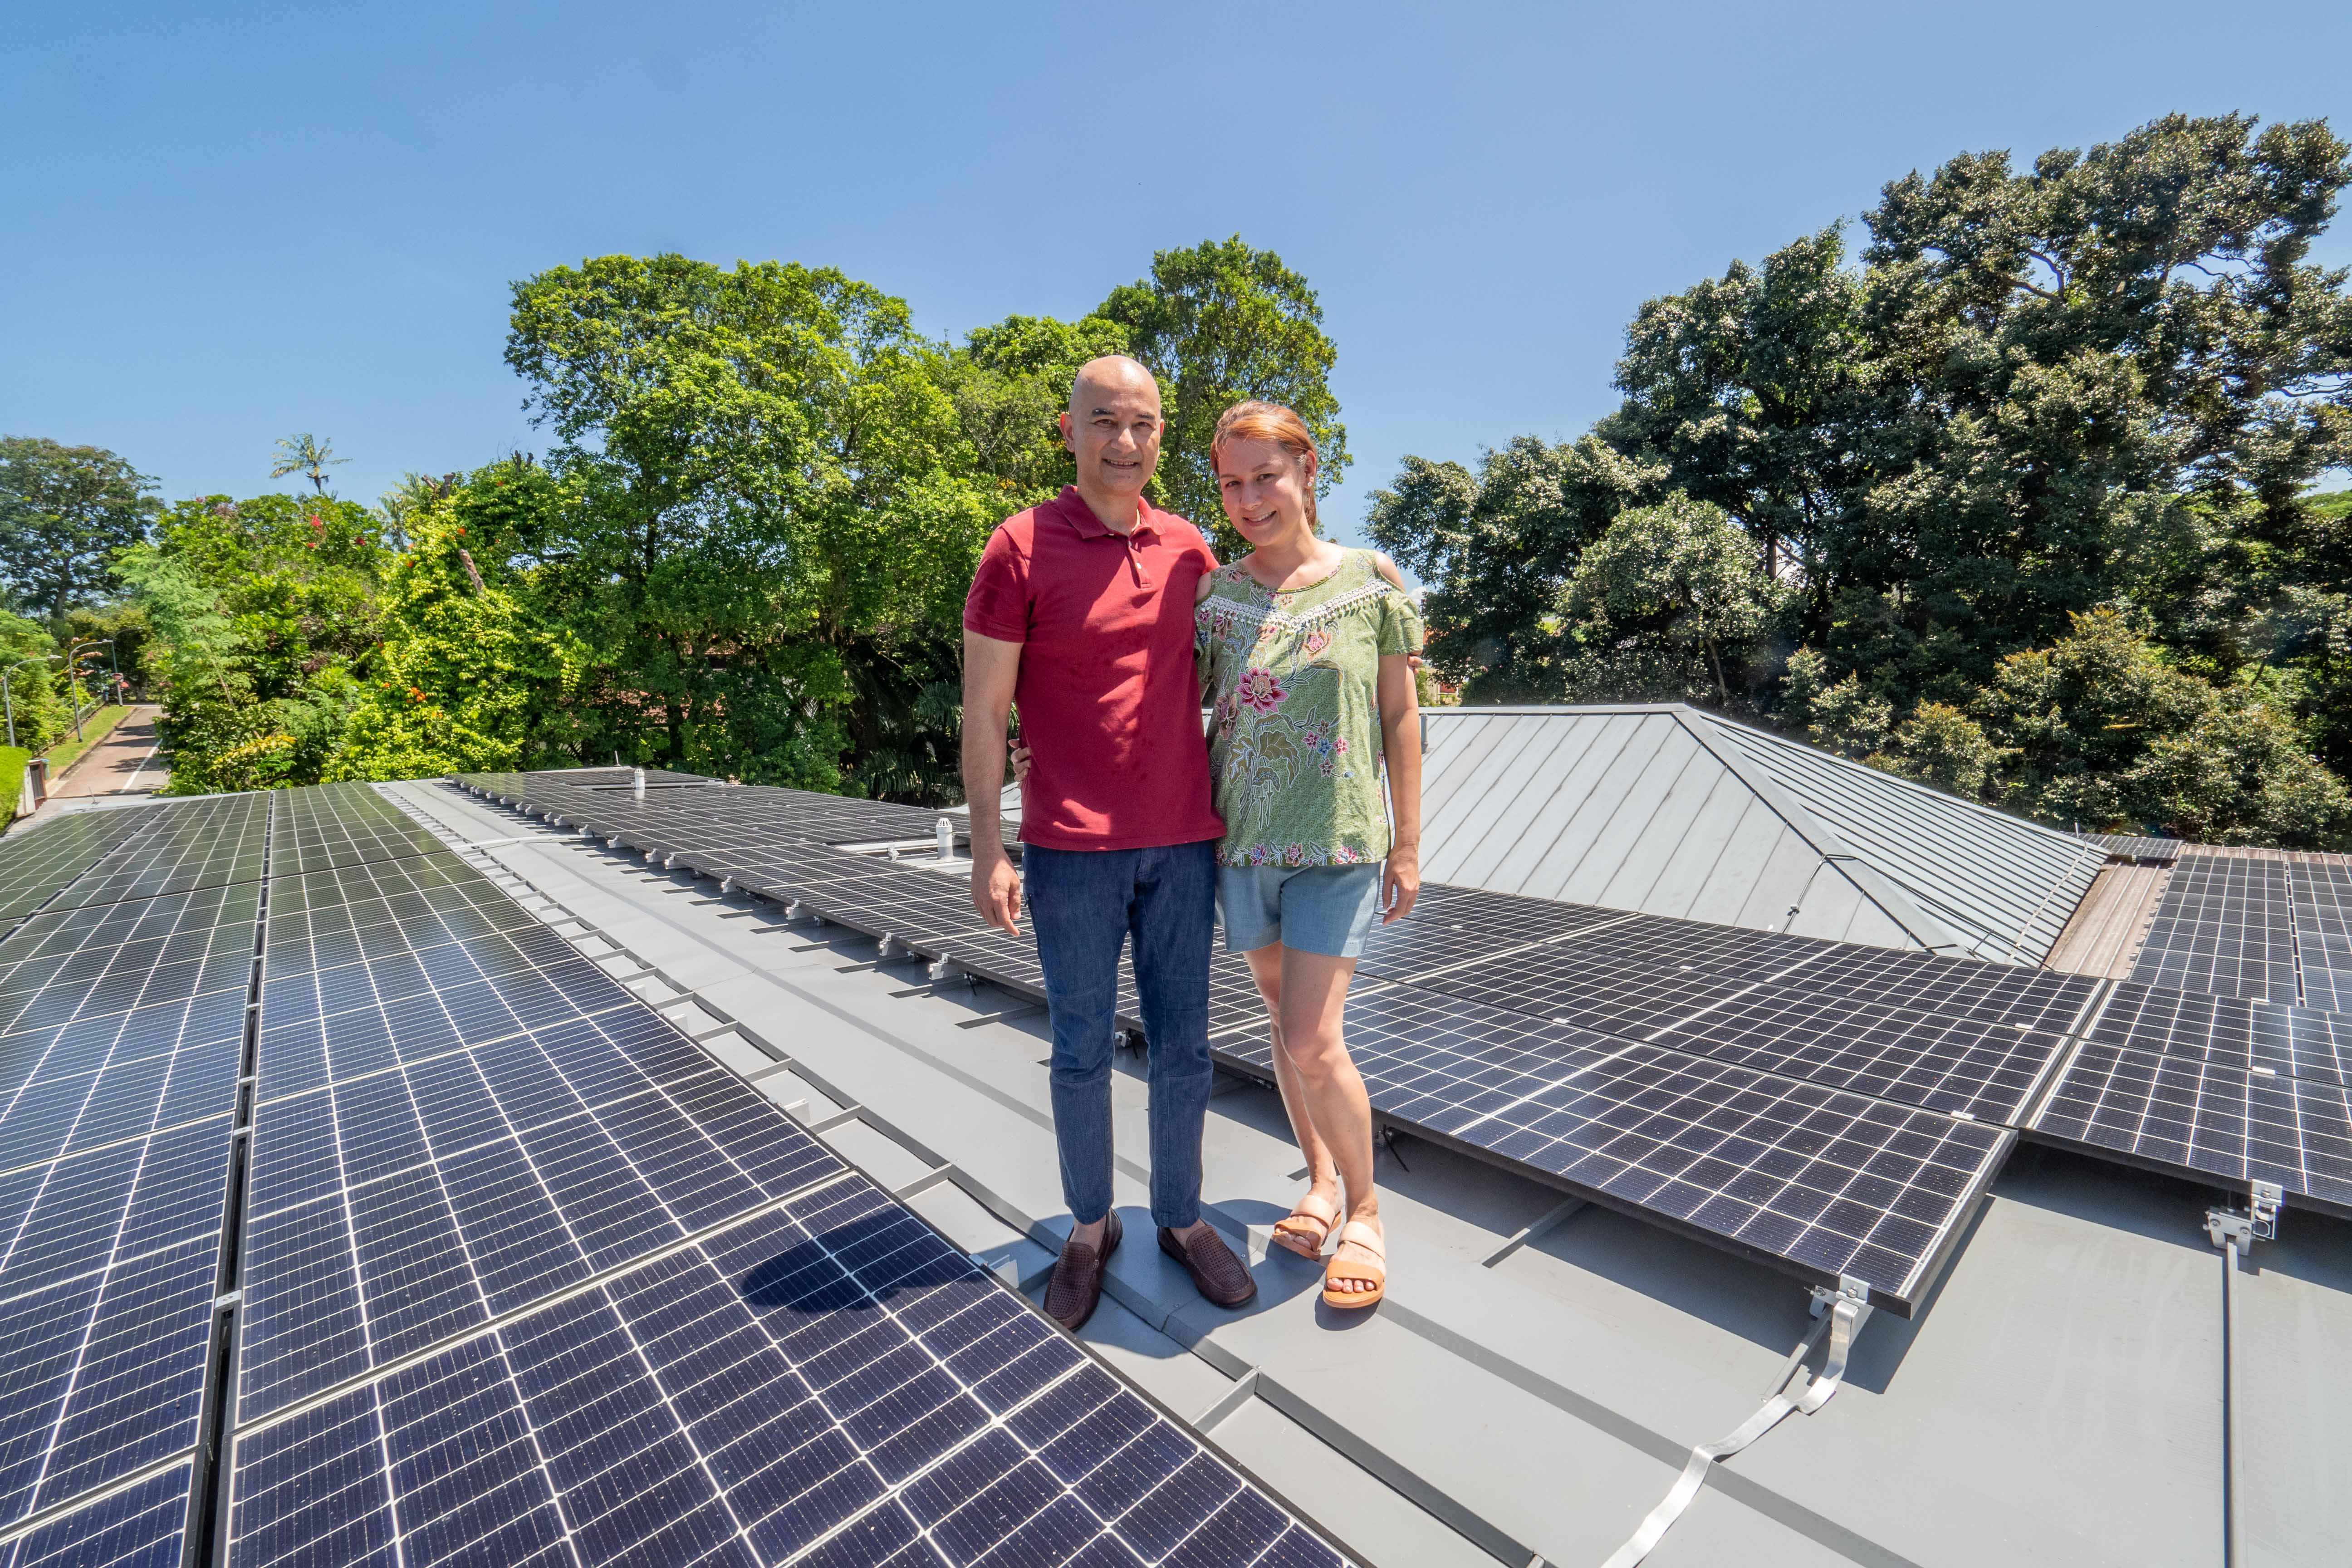 Mr Arun Murthy and his wife, Mrs Sheryl Arun Murthy, pose for a photo on May 12, 2022. In March this year, 100 solar panels were installed on the roof of their house. 